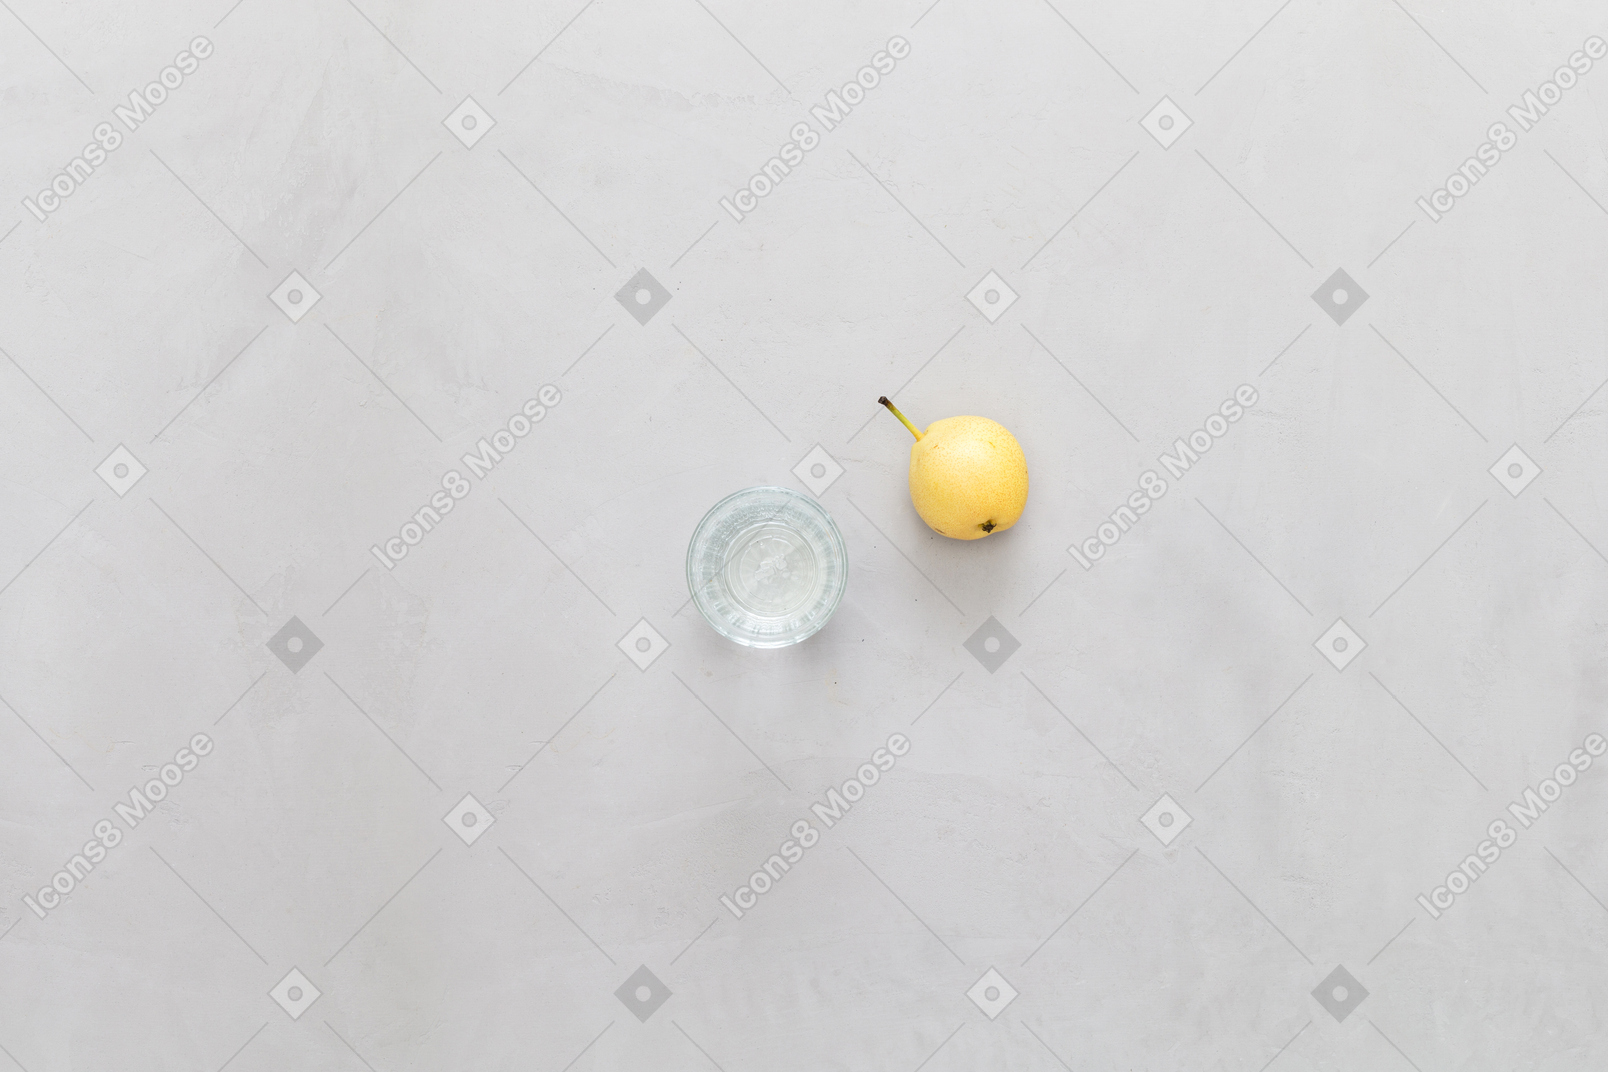 A pear and a glass of water